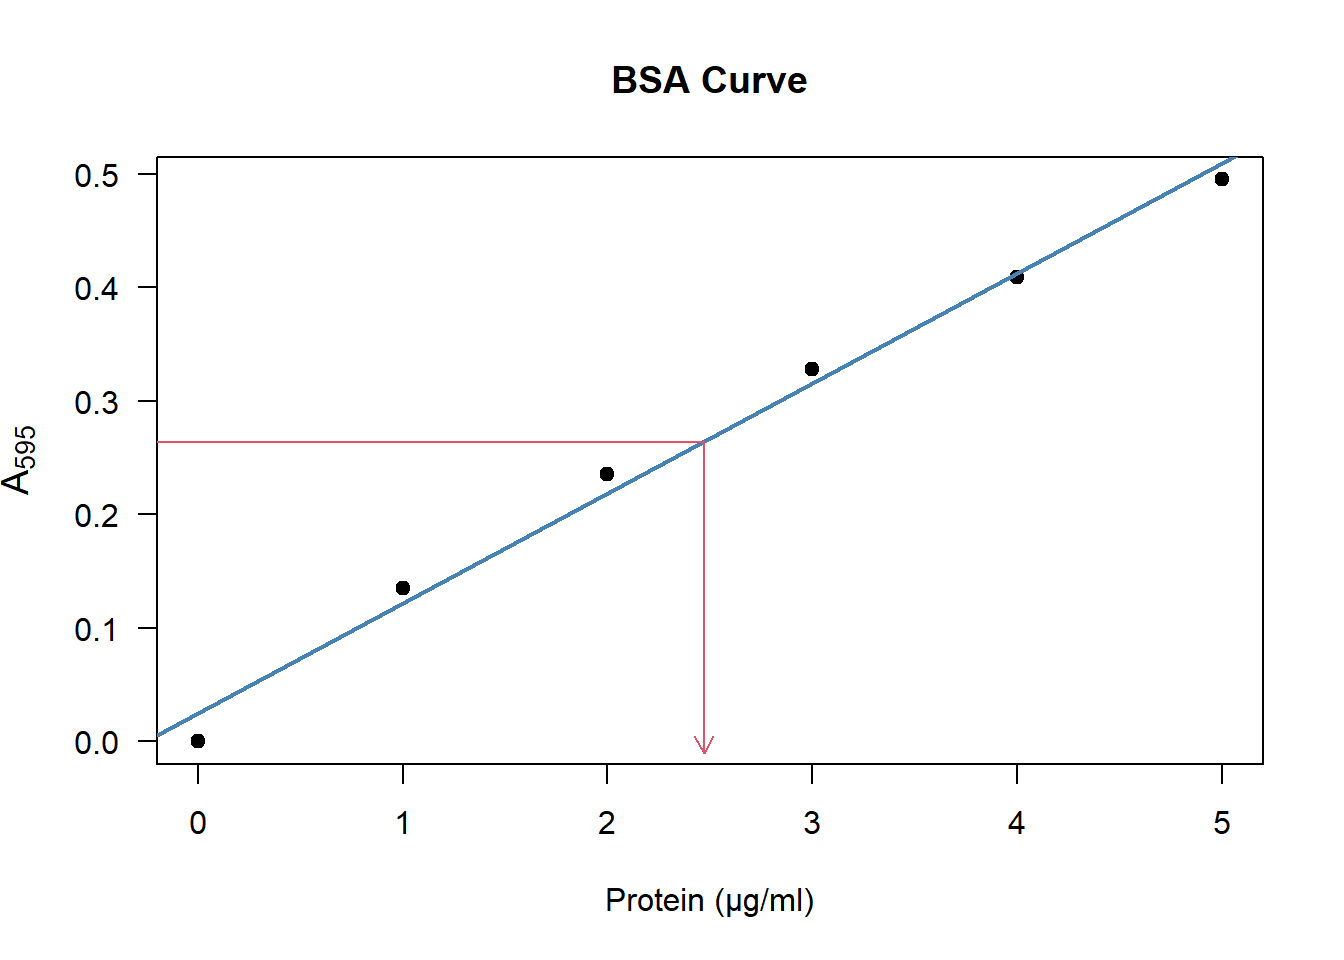 \label{fig:estimateBSA}To estimate the amount of protein, look at the $\text{A}_{595}$ on the y-axis, then see which position it corresponds to on the x-axis.